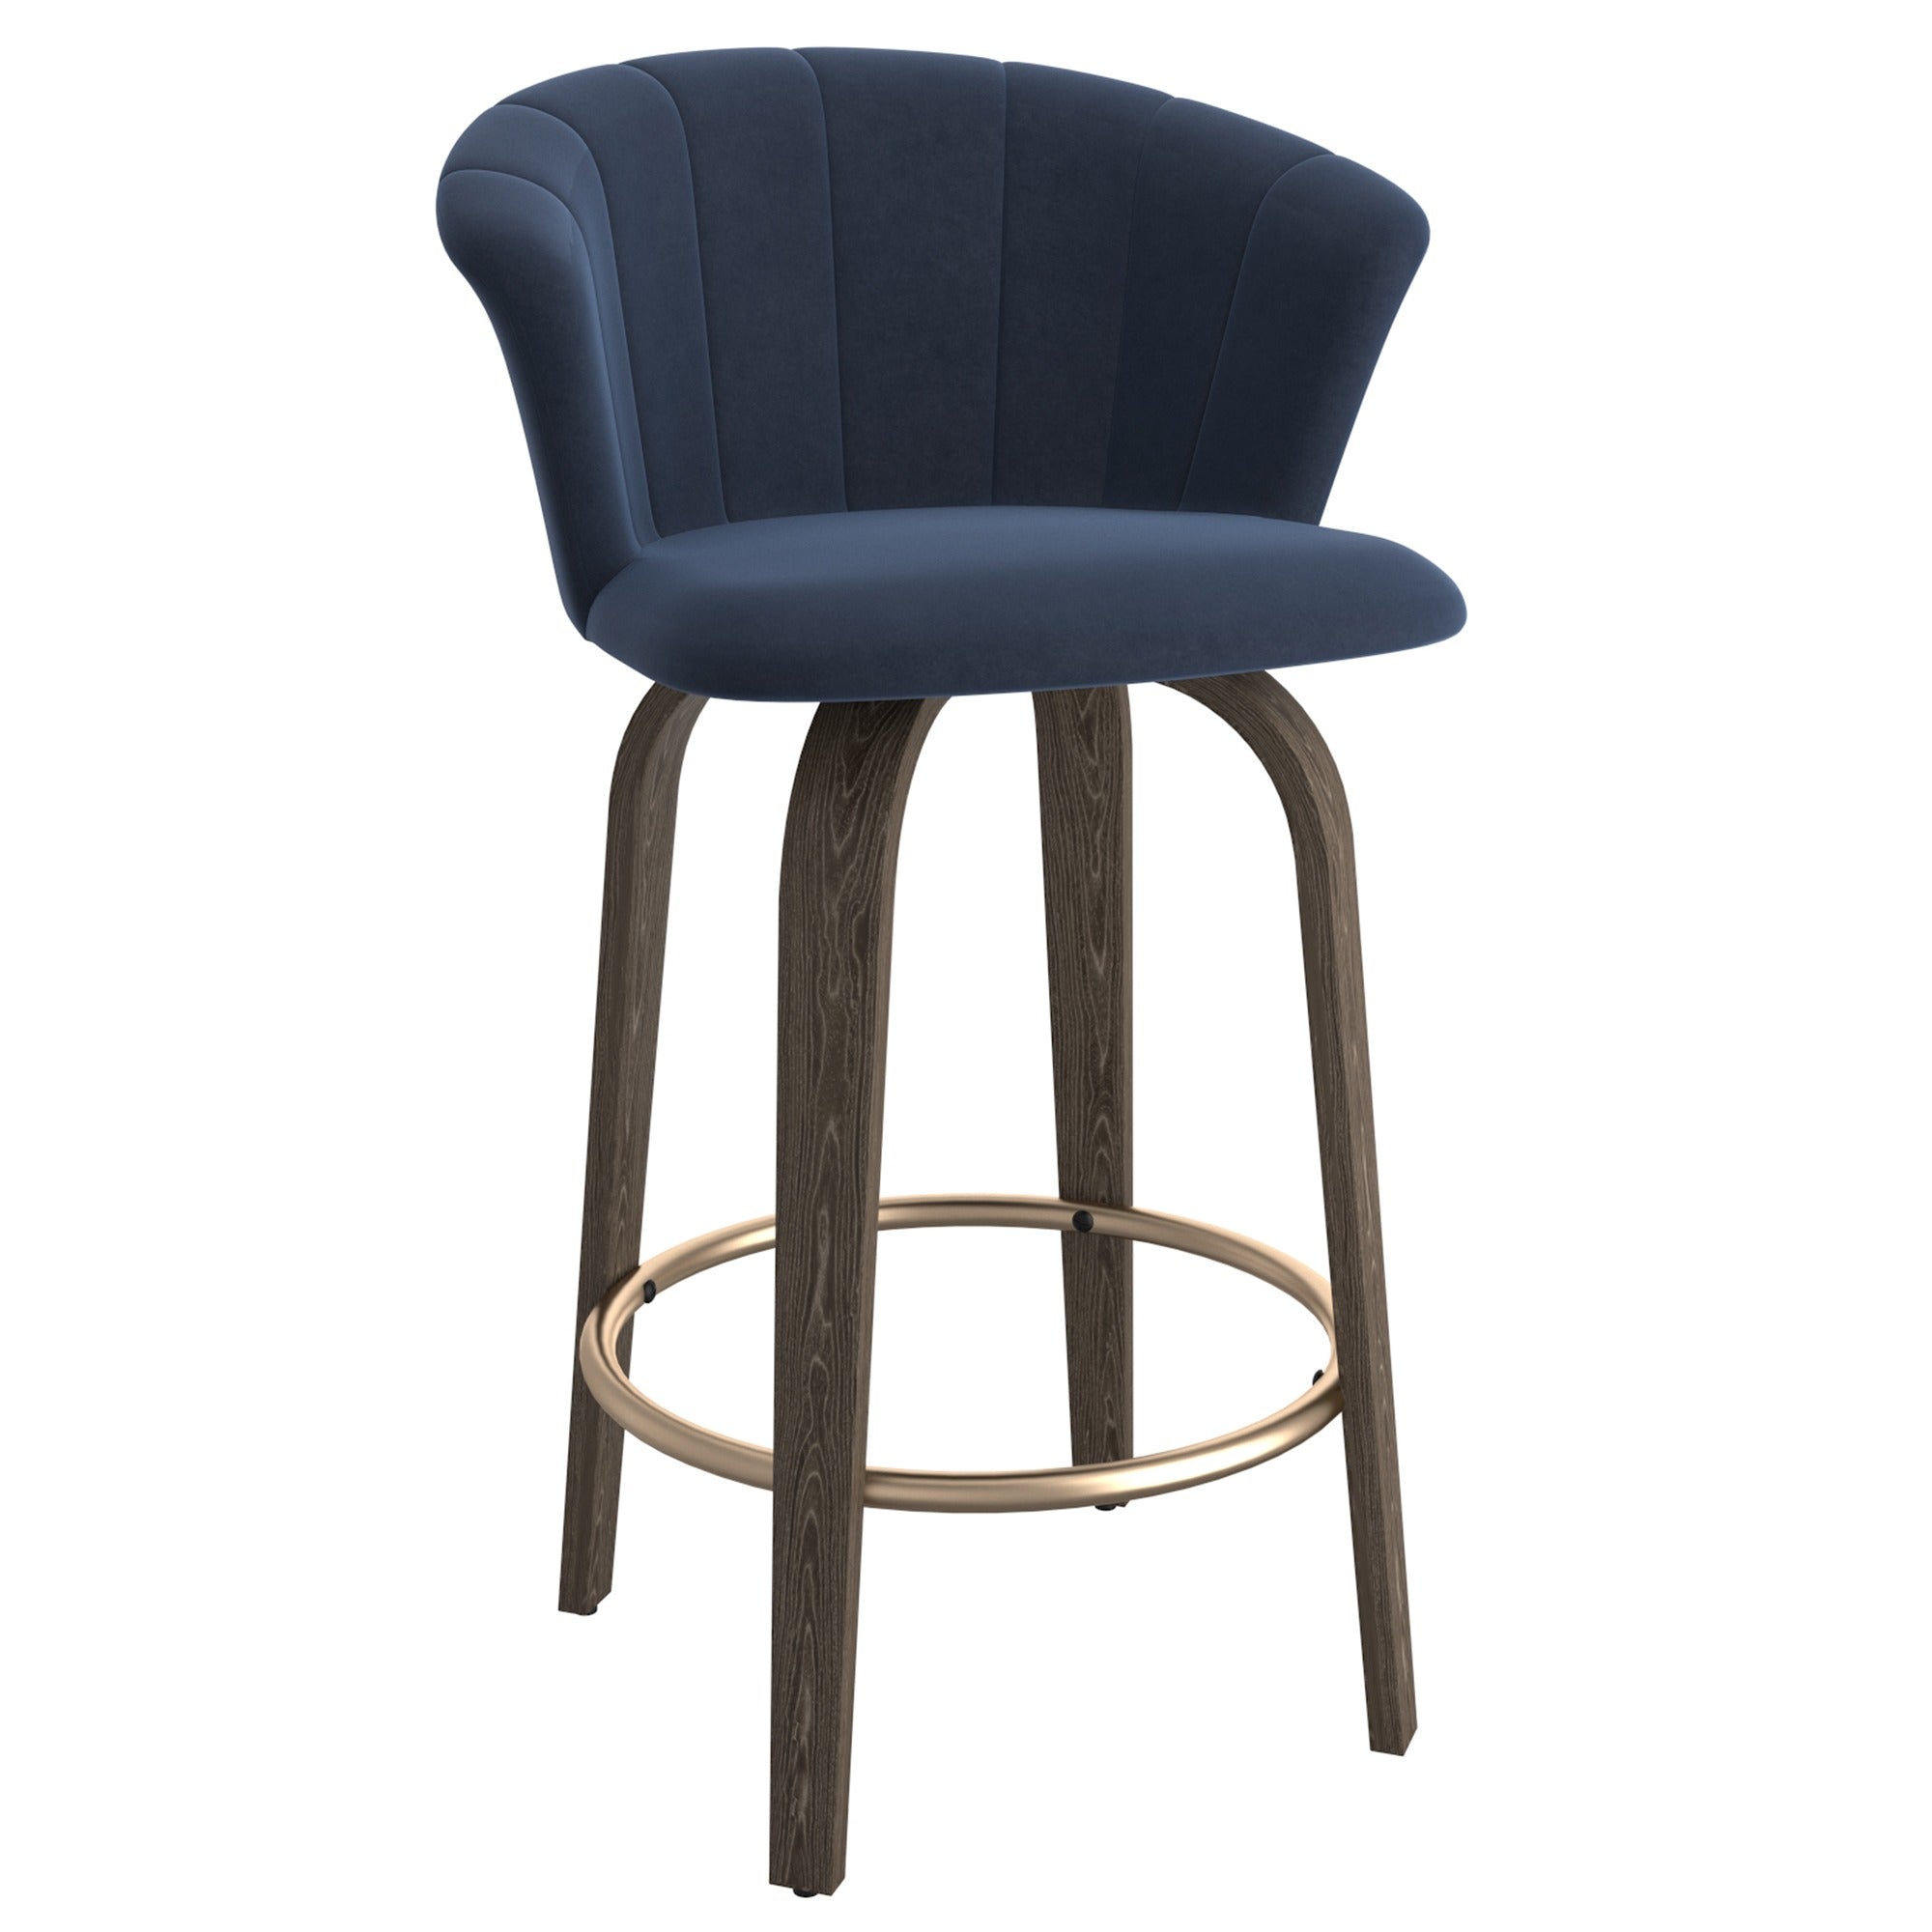 Tula 26" Counter Stool in Black and Washed Oak